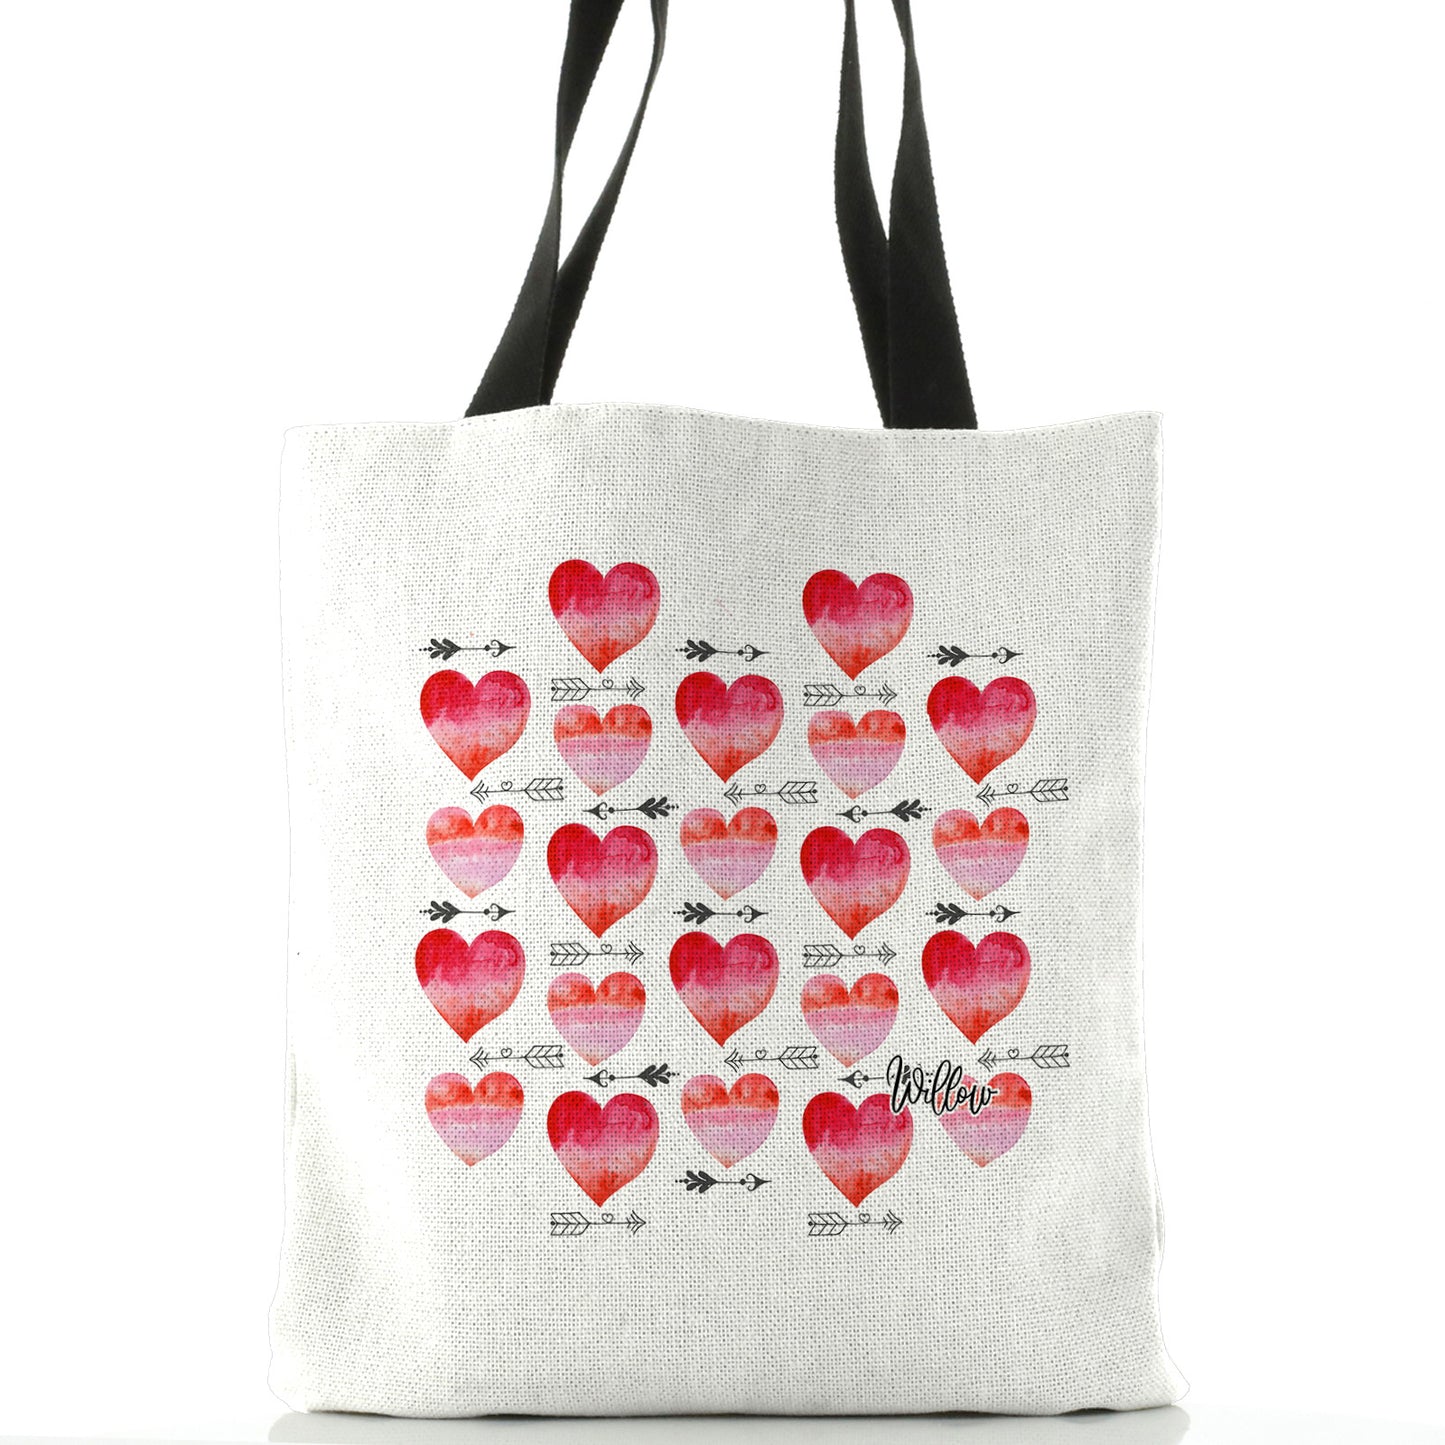 Personalised White Tote Bag with Stylish Text and Arrow Love Hearts Print